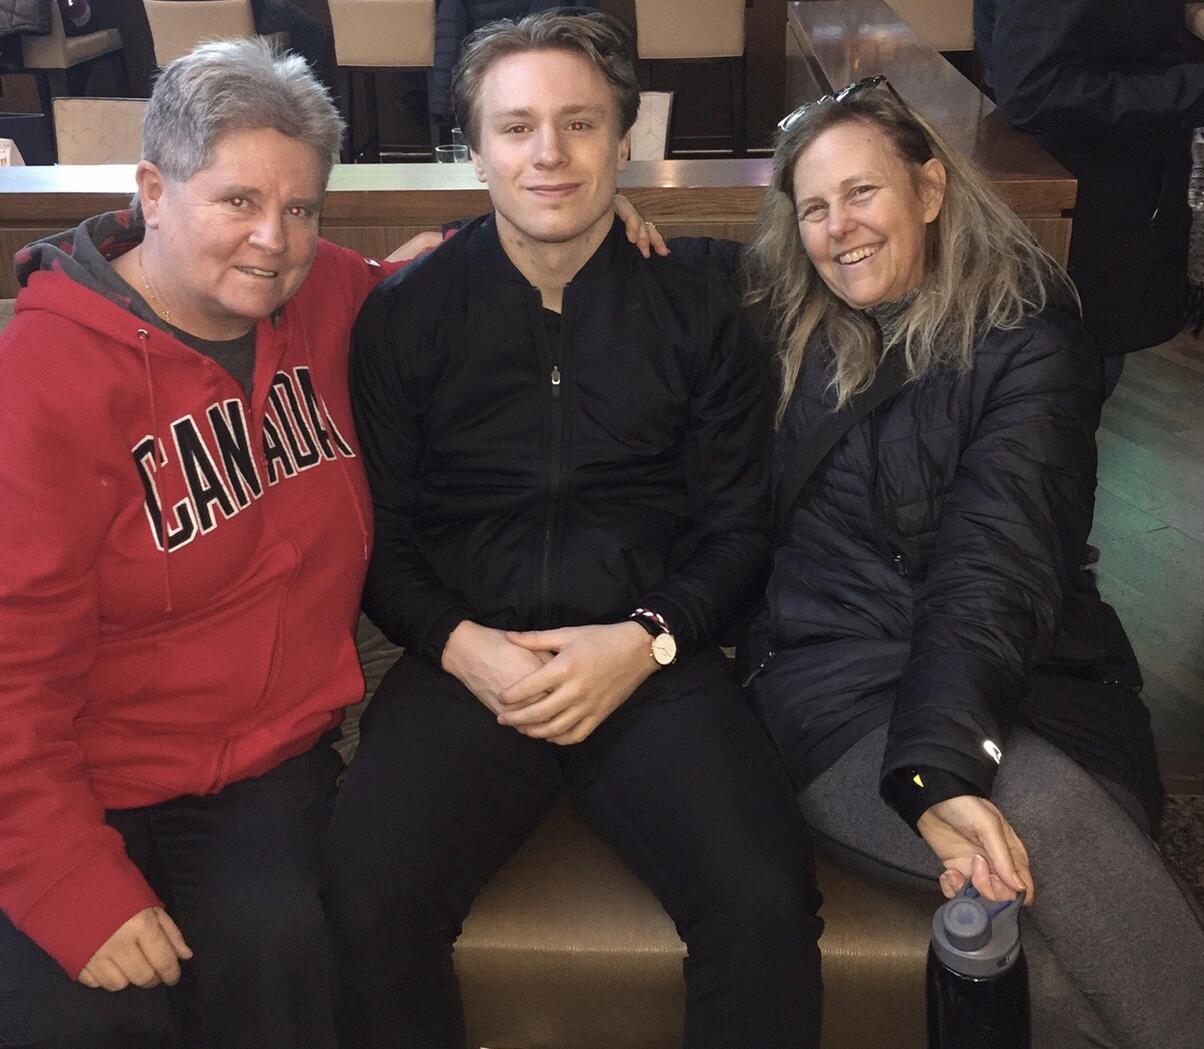 Luc Robitaille's 16-year-old son Jessarae launches attempt at